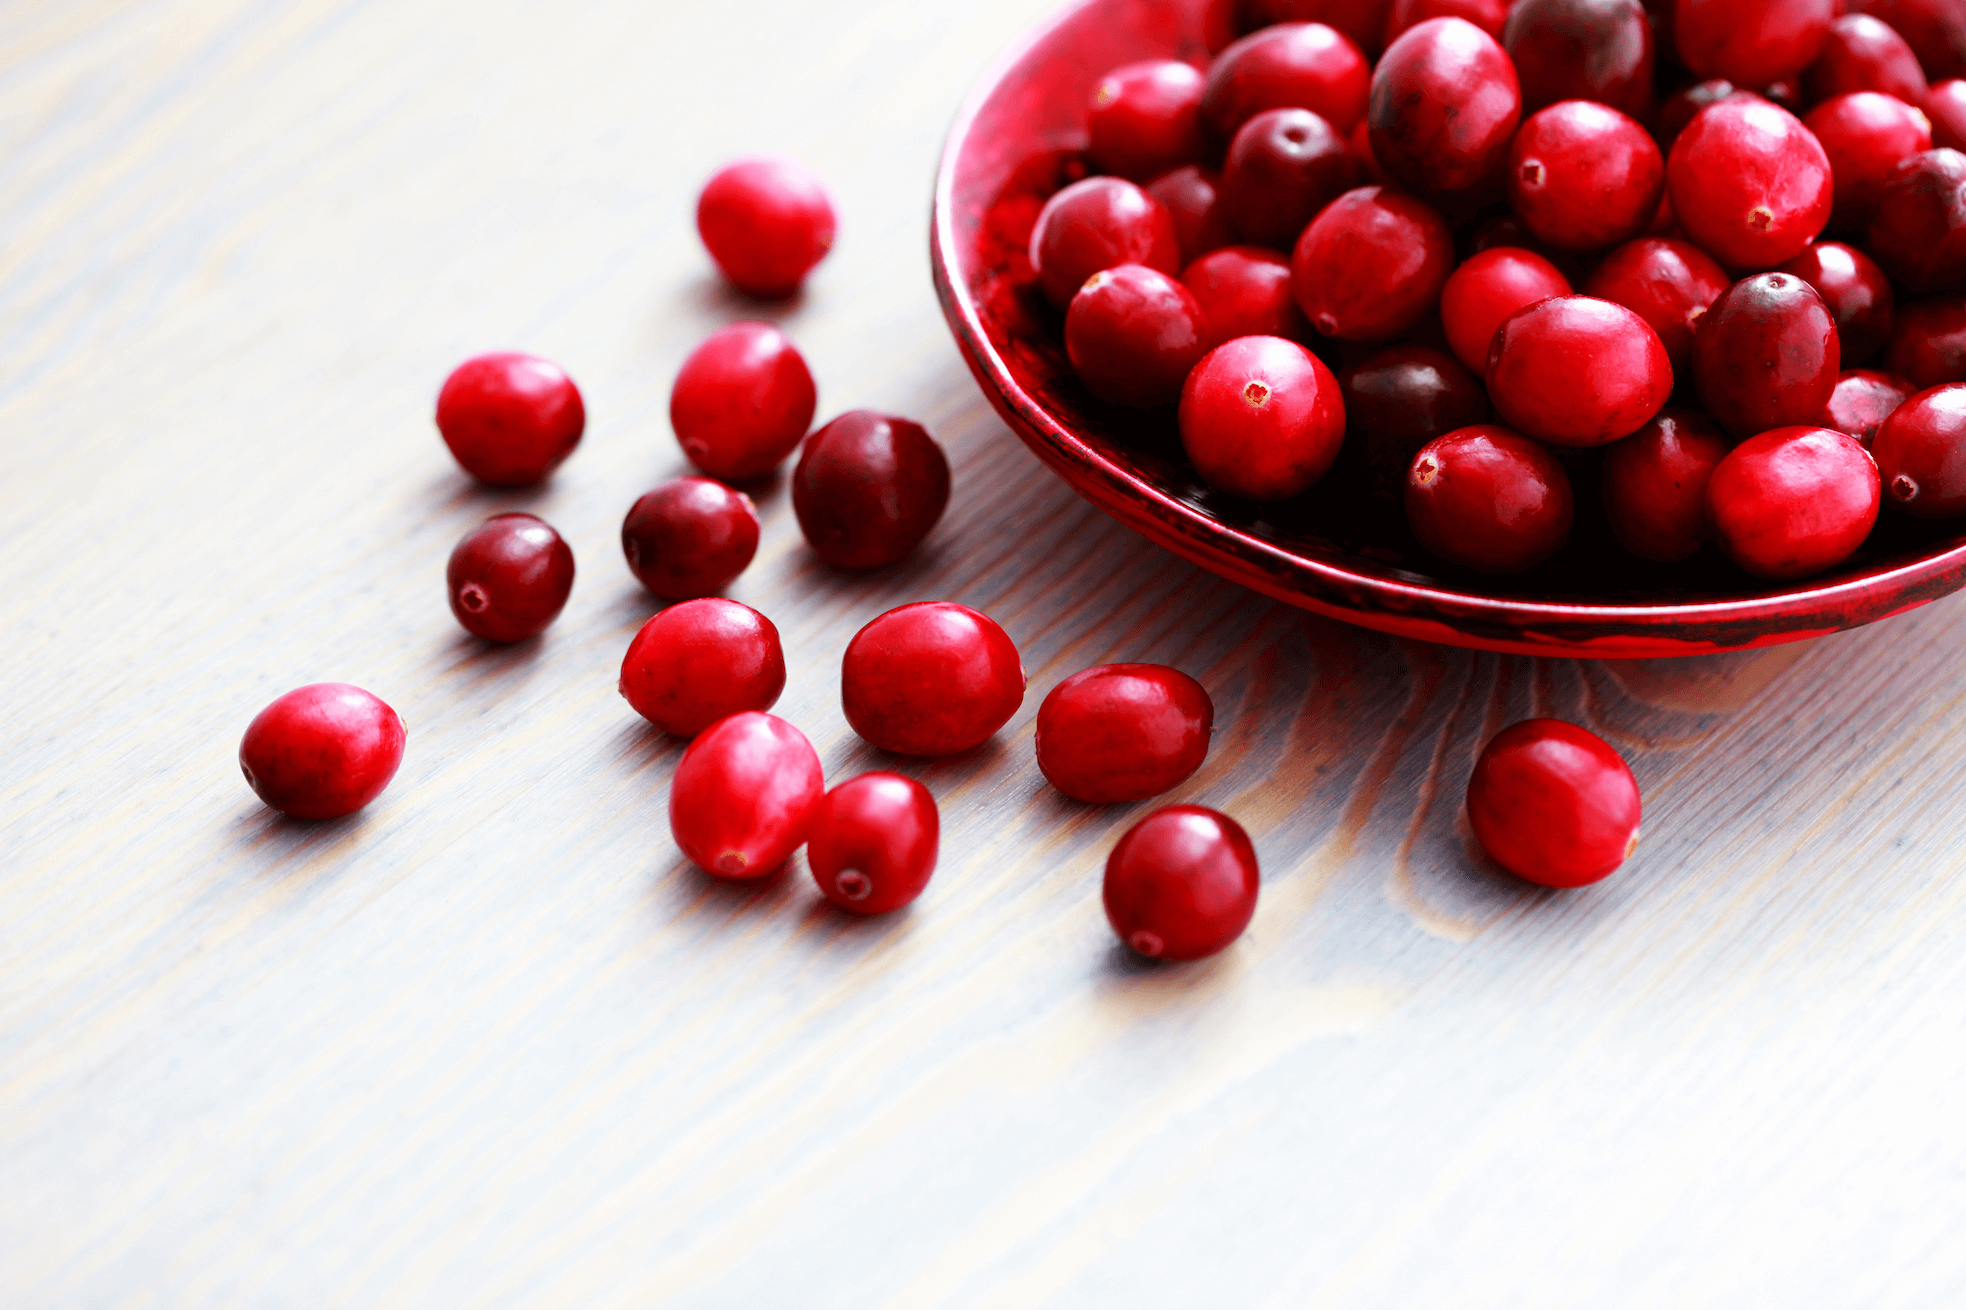 Does Cranberry Juice Prevent UTIs (Urinary Tract Infections)?